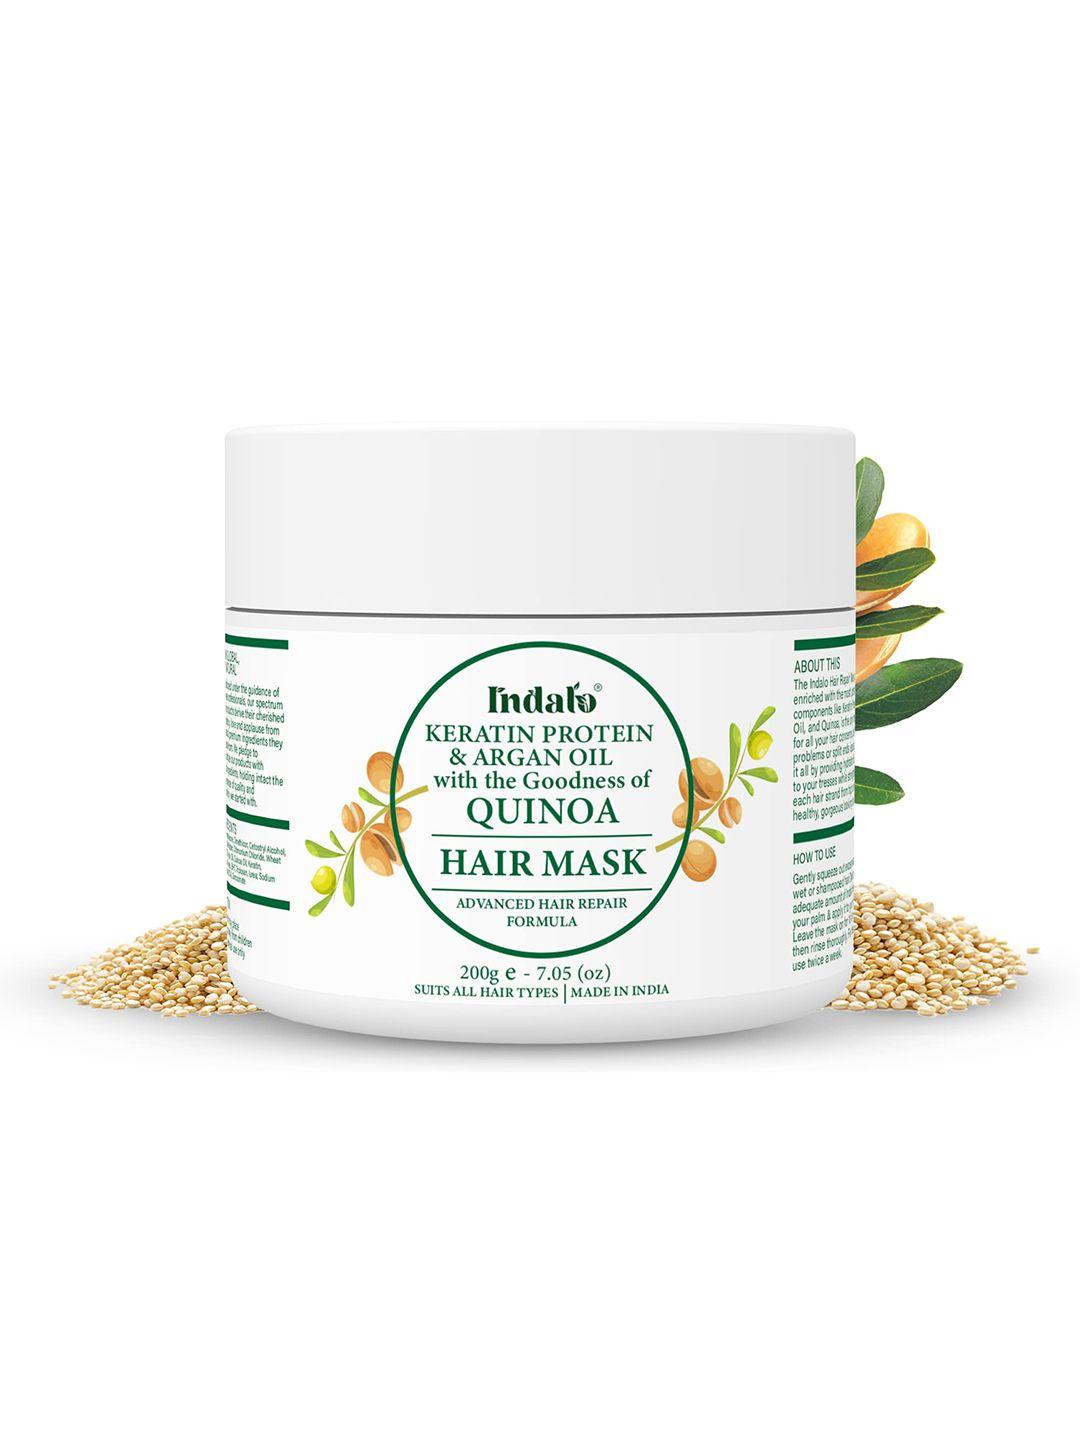 indalo quinoa hair mask with keratin & argan oil for dry,frizzy & damaged hair repair-200g